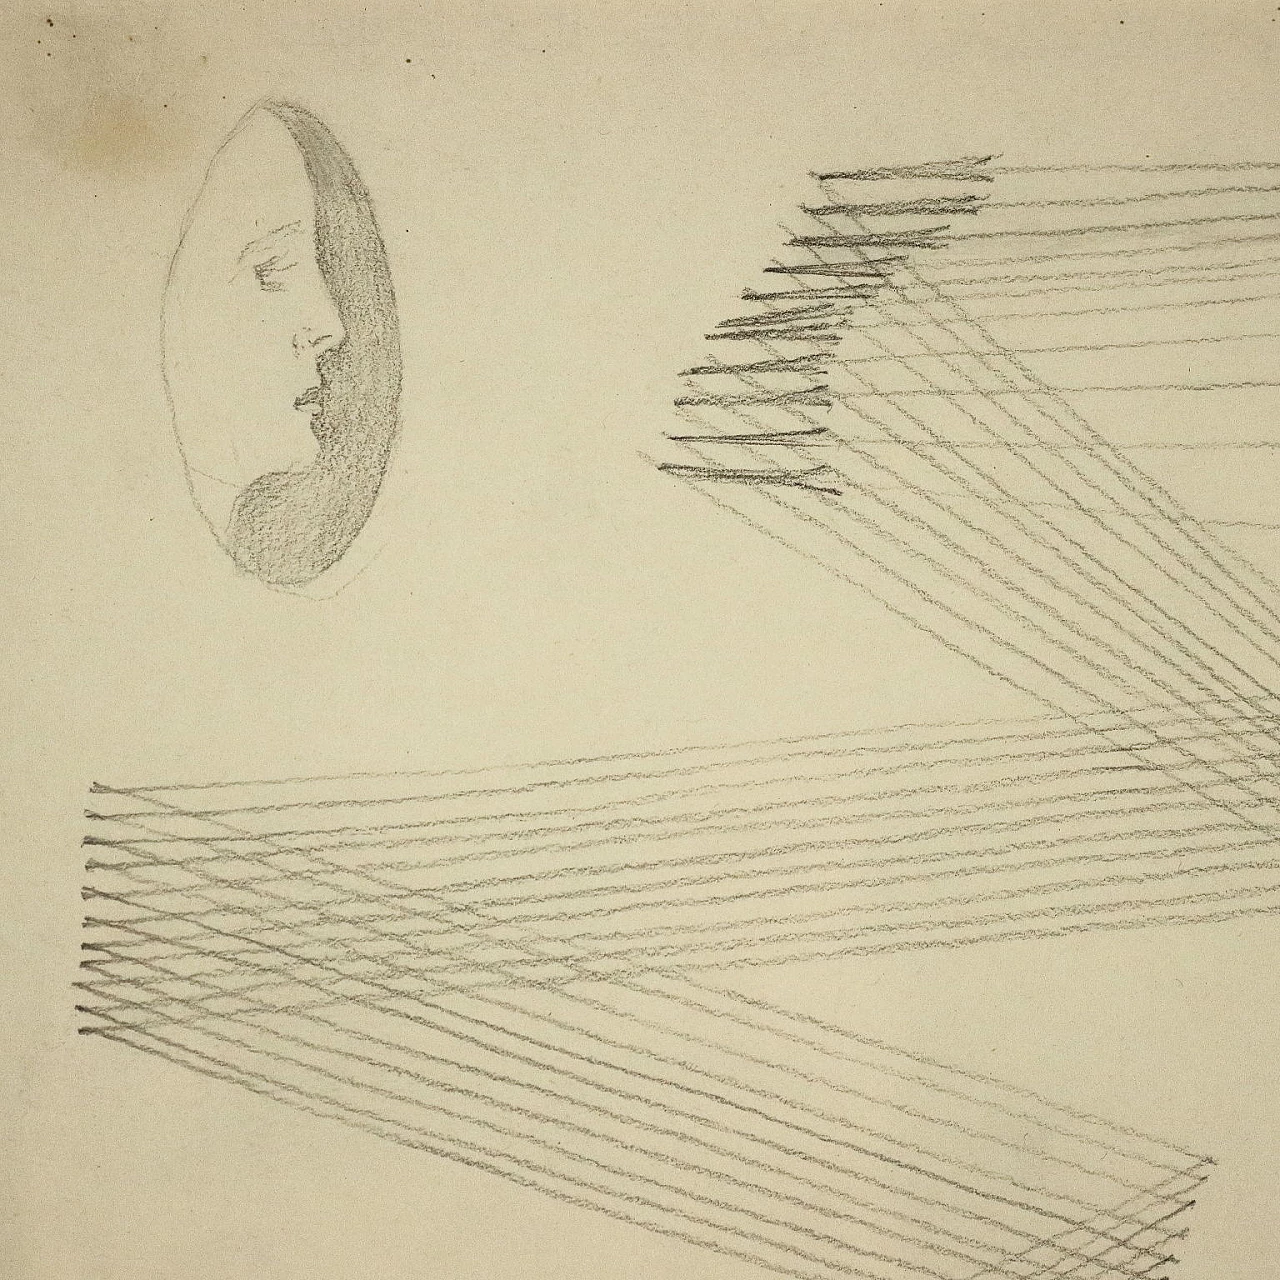 Fausto Melotti, abstract subject, pencil on paper, 1972 4